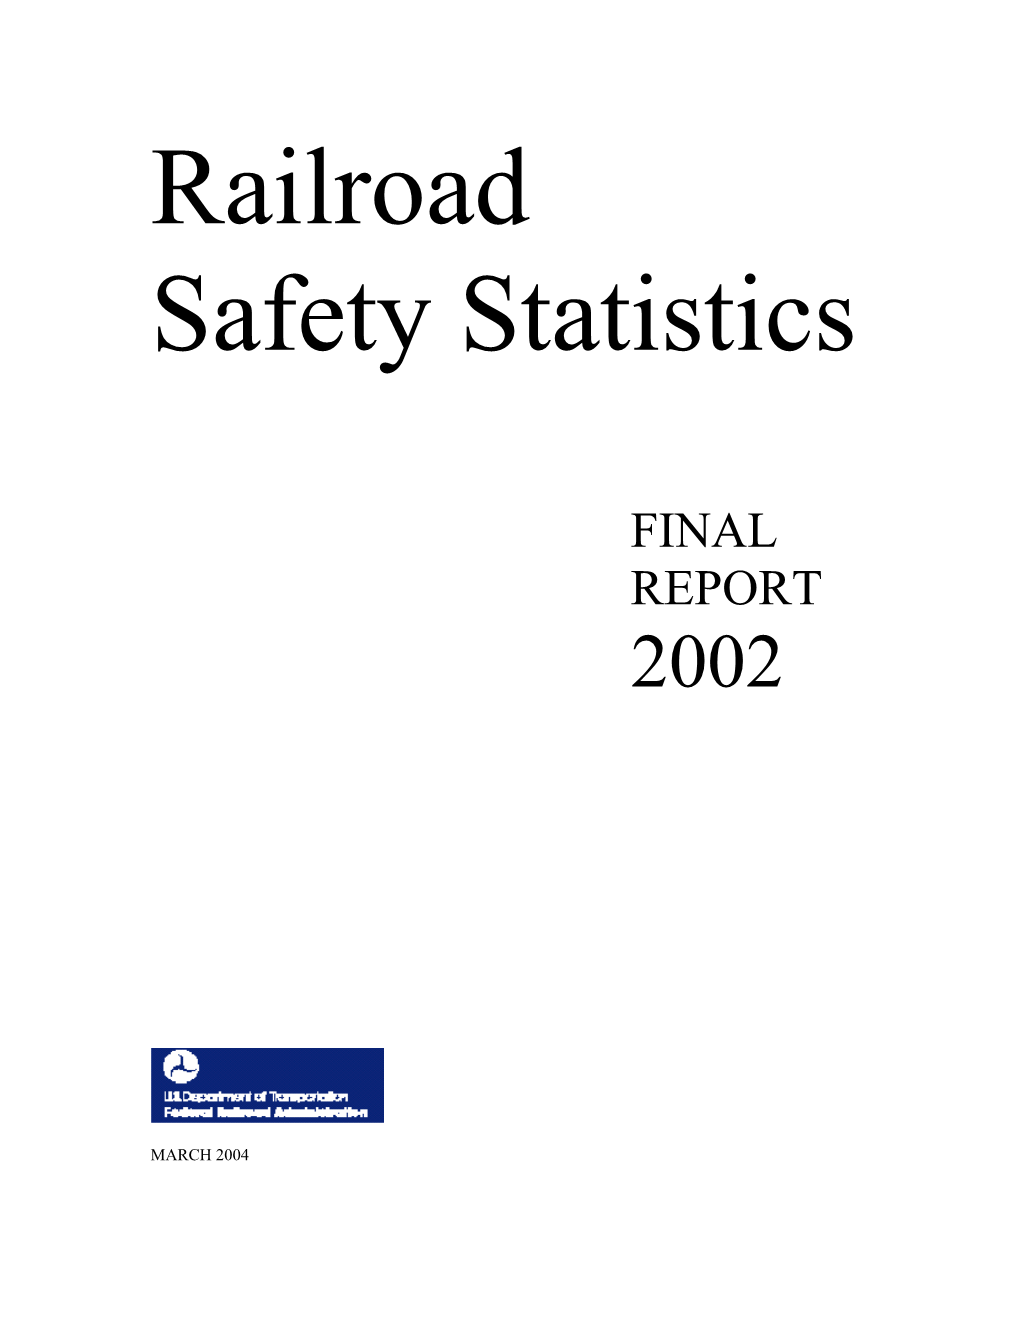 Railroad Safety Statistics – Annual Report 2002 Is Intended As a Resource for the FRA’S Safety Partners